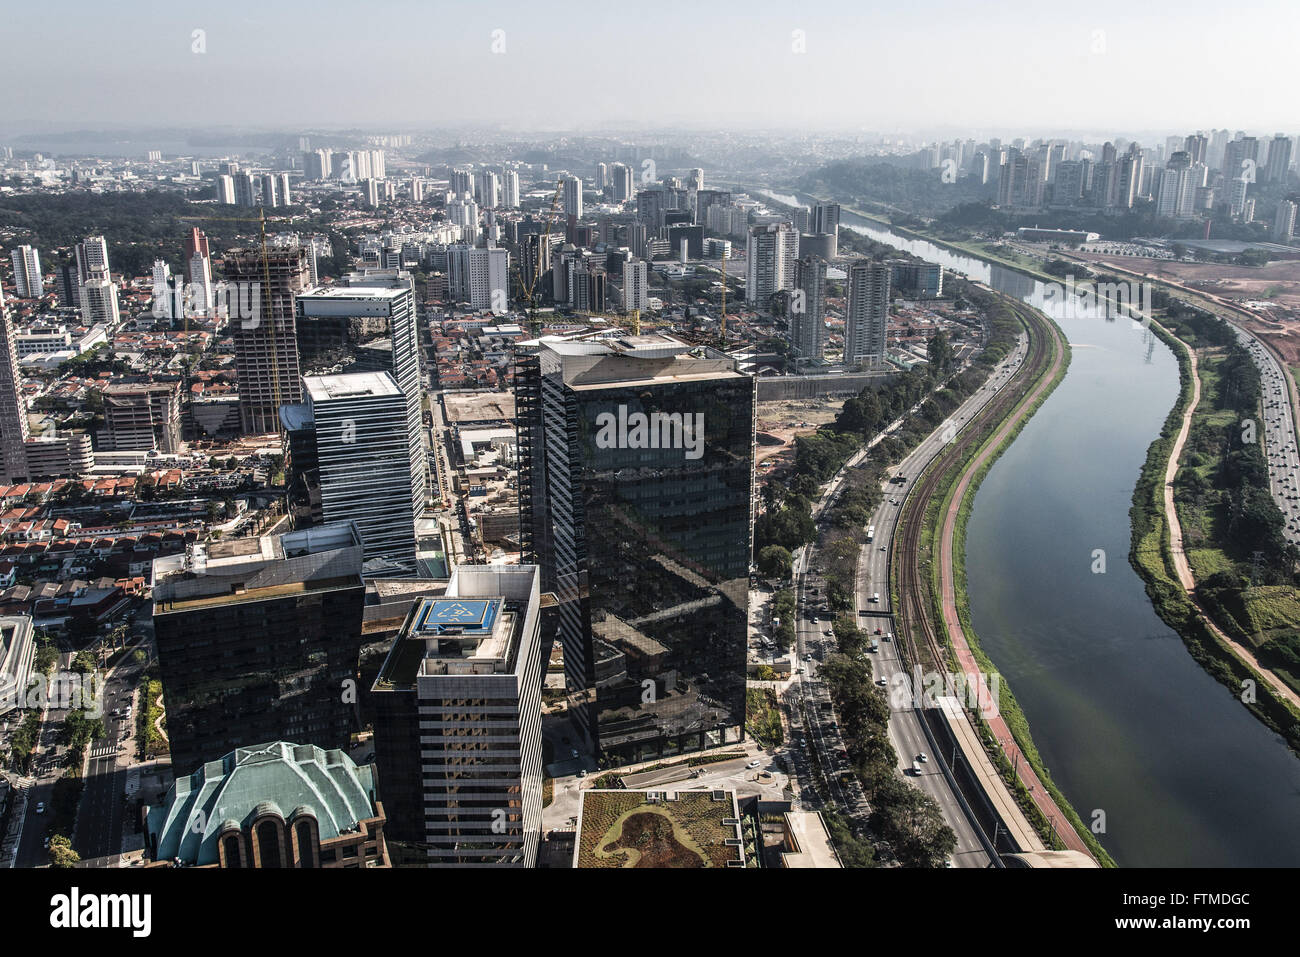 Aerial view of portions of the Marginal Pinheiros River Stock Photo